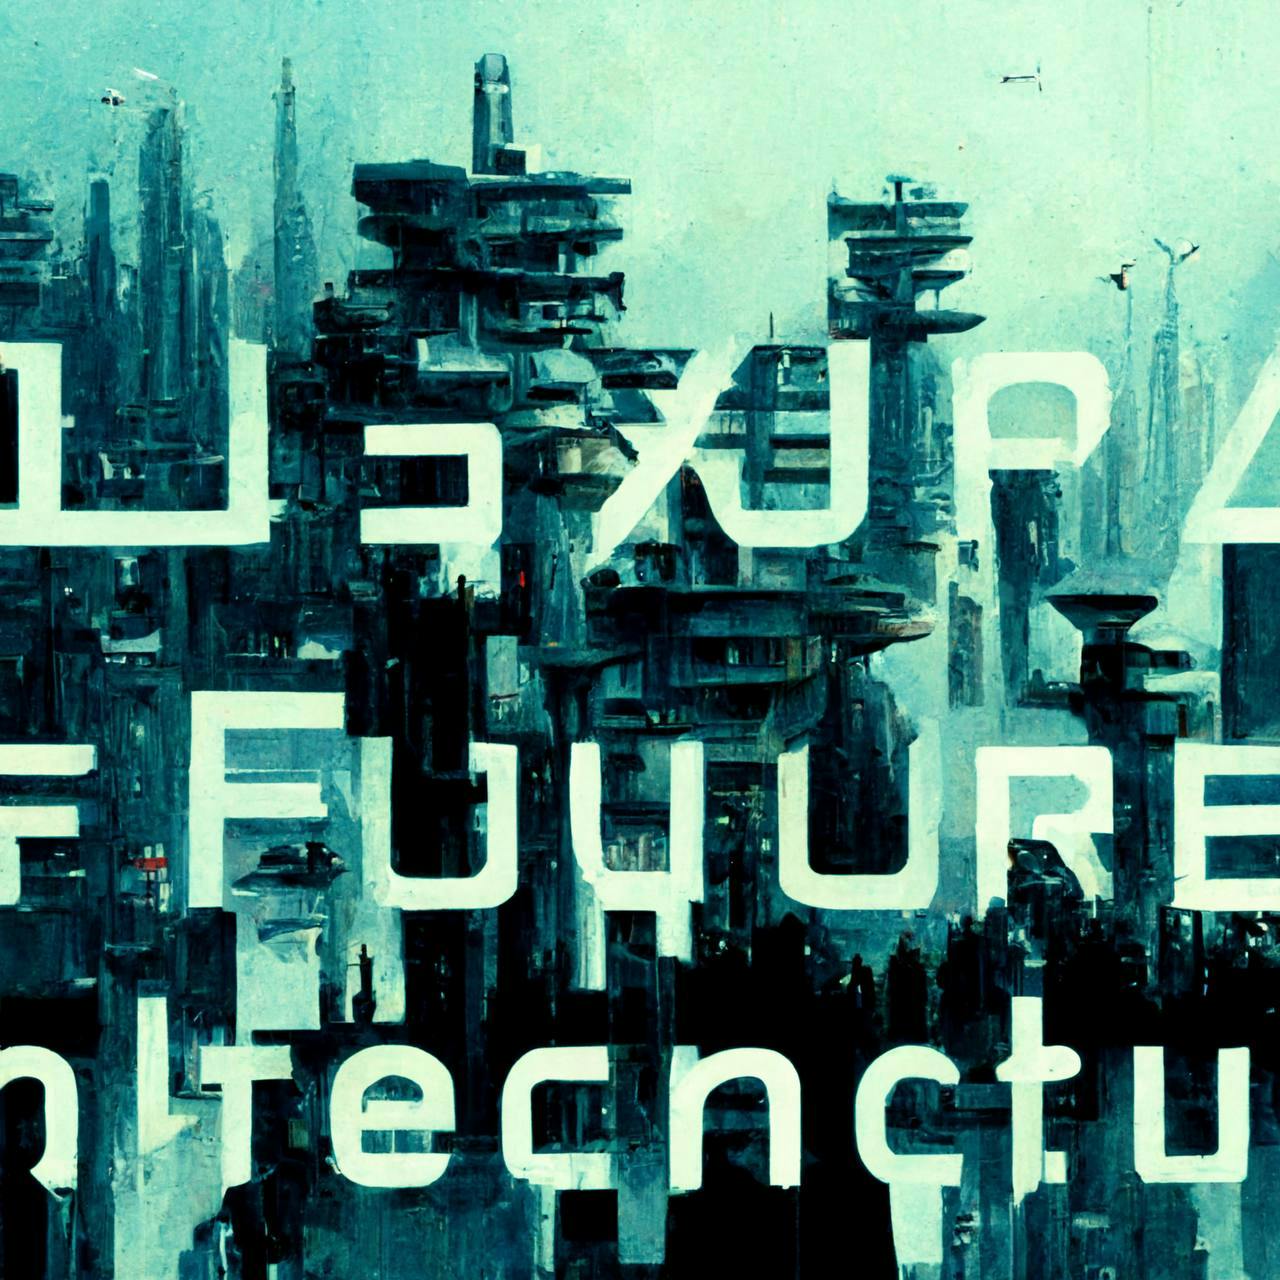 "modular futures evolutionary architecture adaptive interoperable systems cyberpunk special project lane" by Midjourney